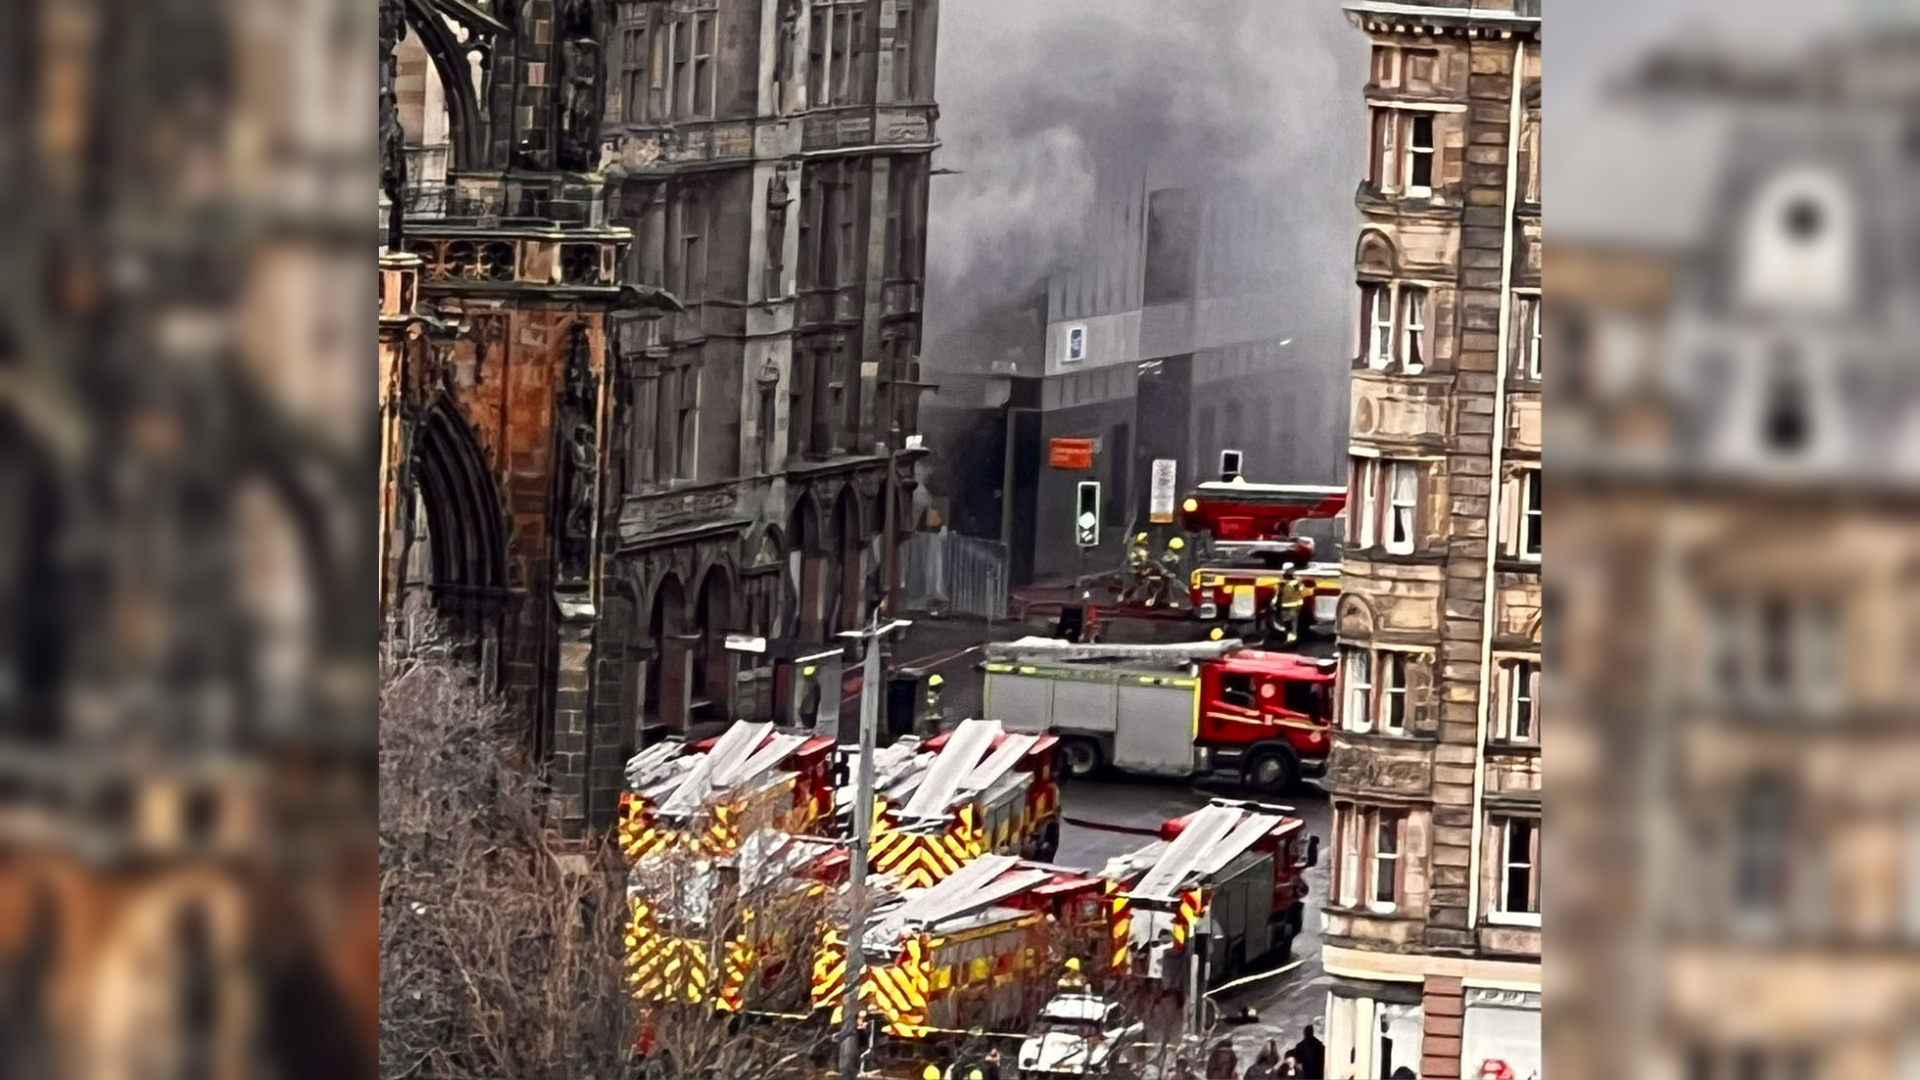 A major fire broke out in the Jenners building in Edinburgh on Monday.